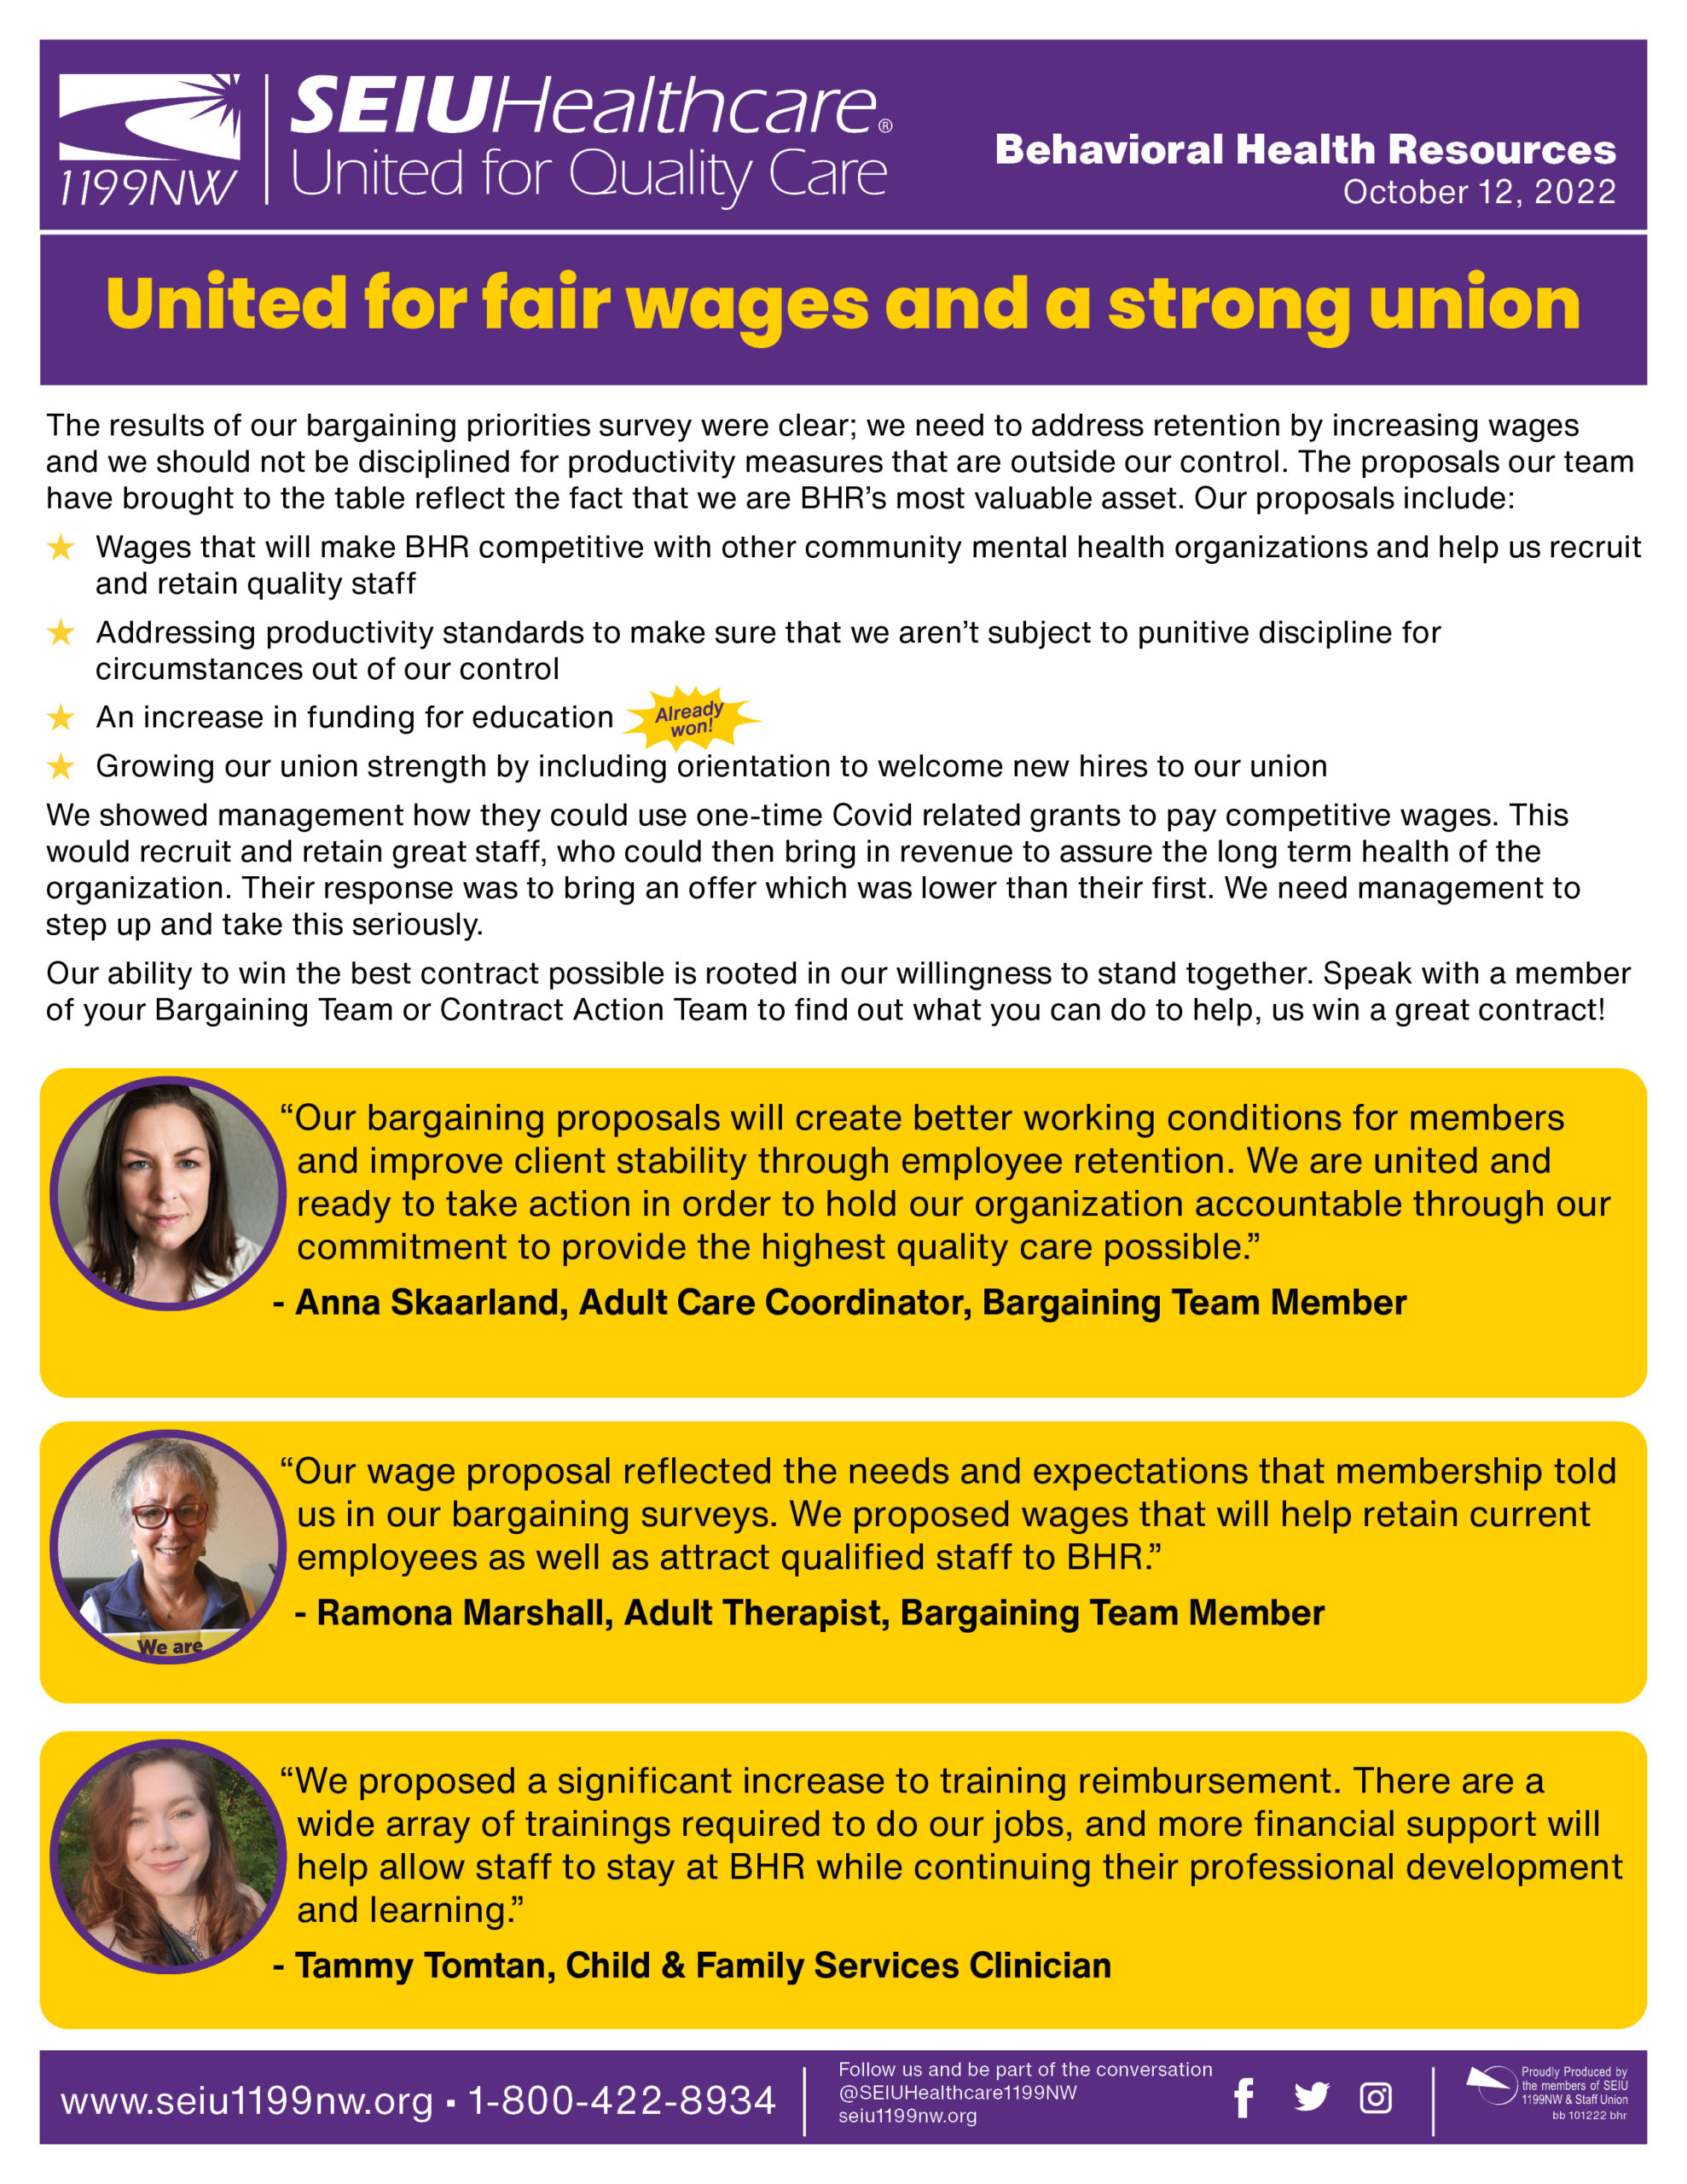 United for fair wages and a strong union